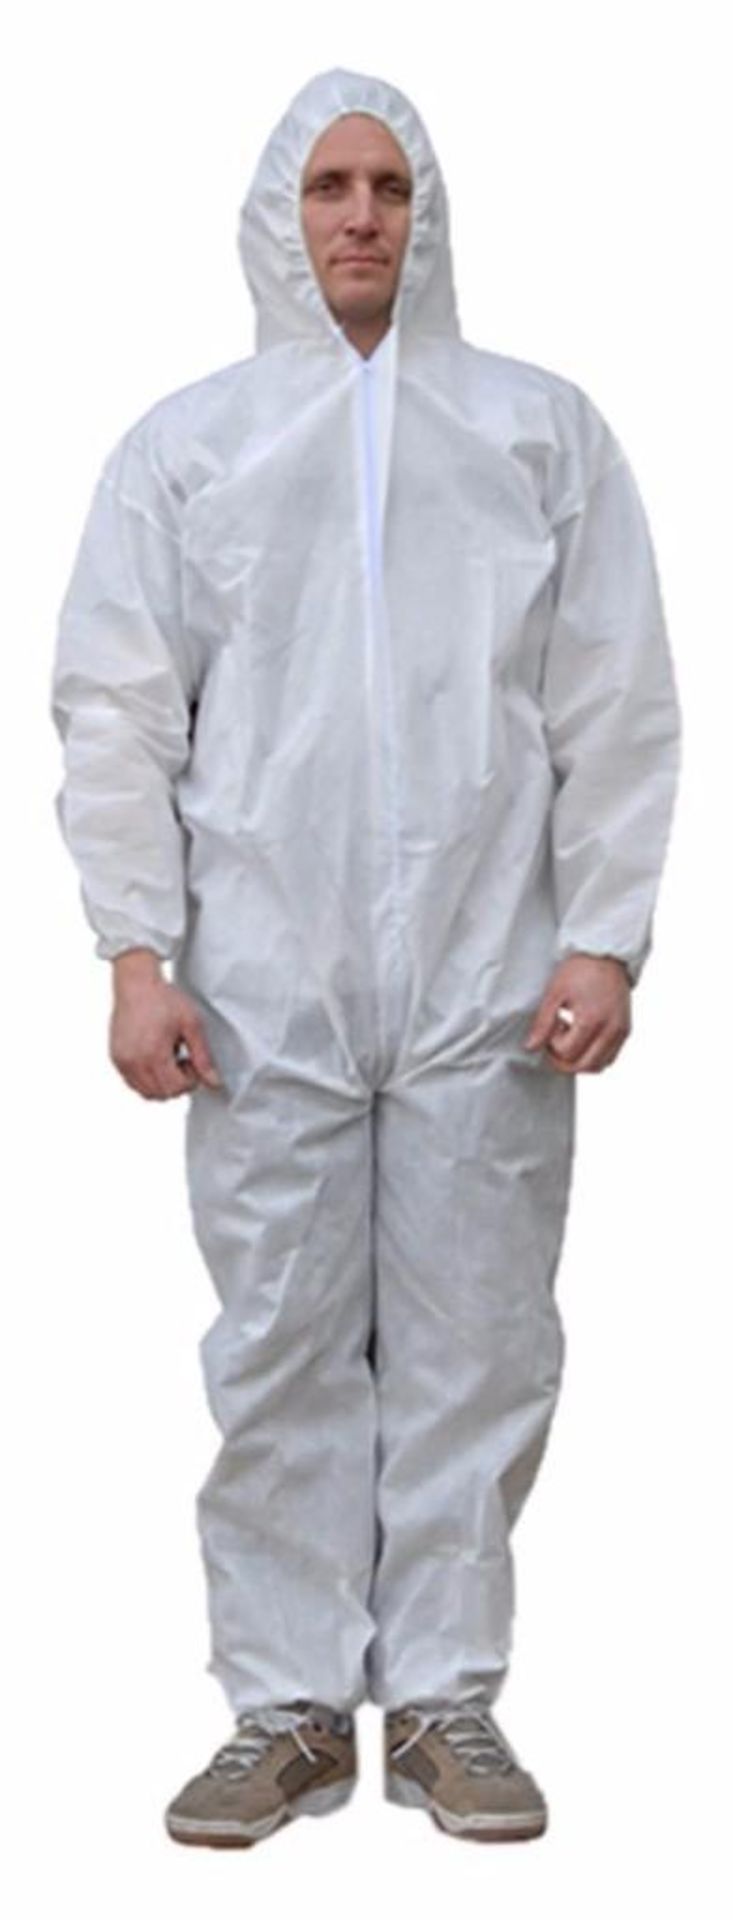 [50] MAJESTIC GLOVE SMS Coveralls w/ Hood, Size 4X-Large (2 Packs of 25)